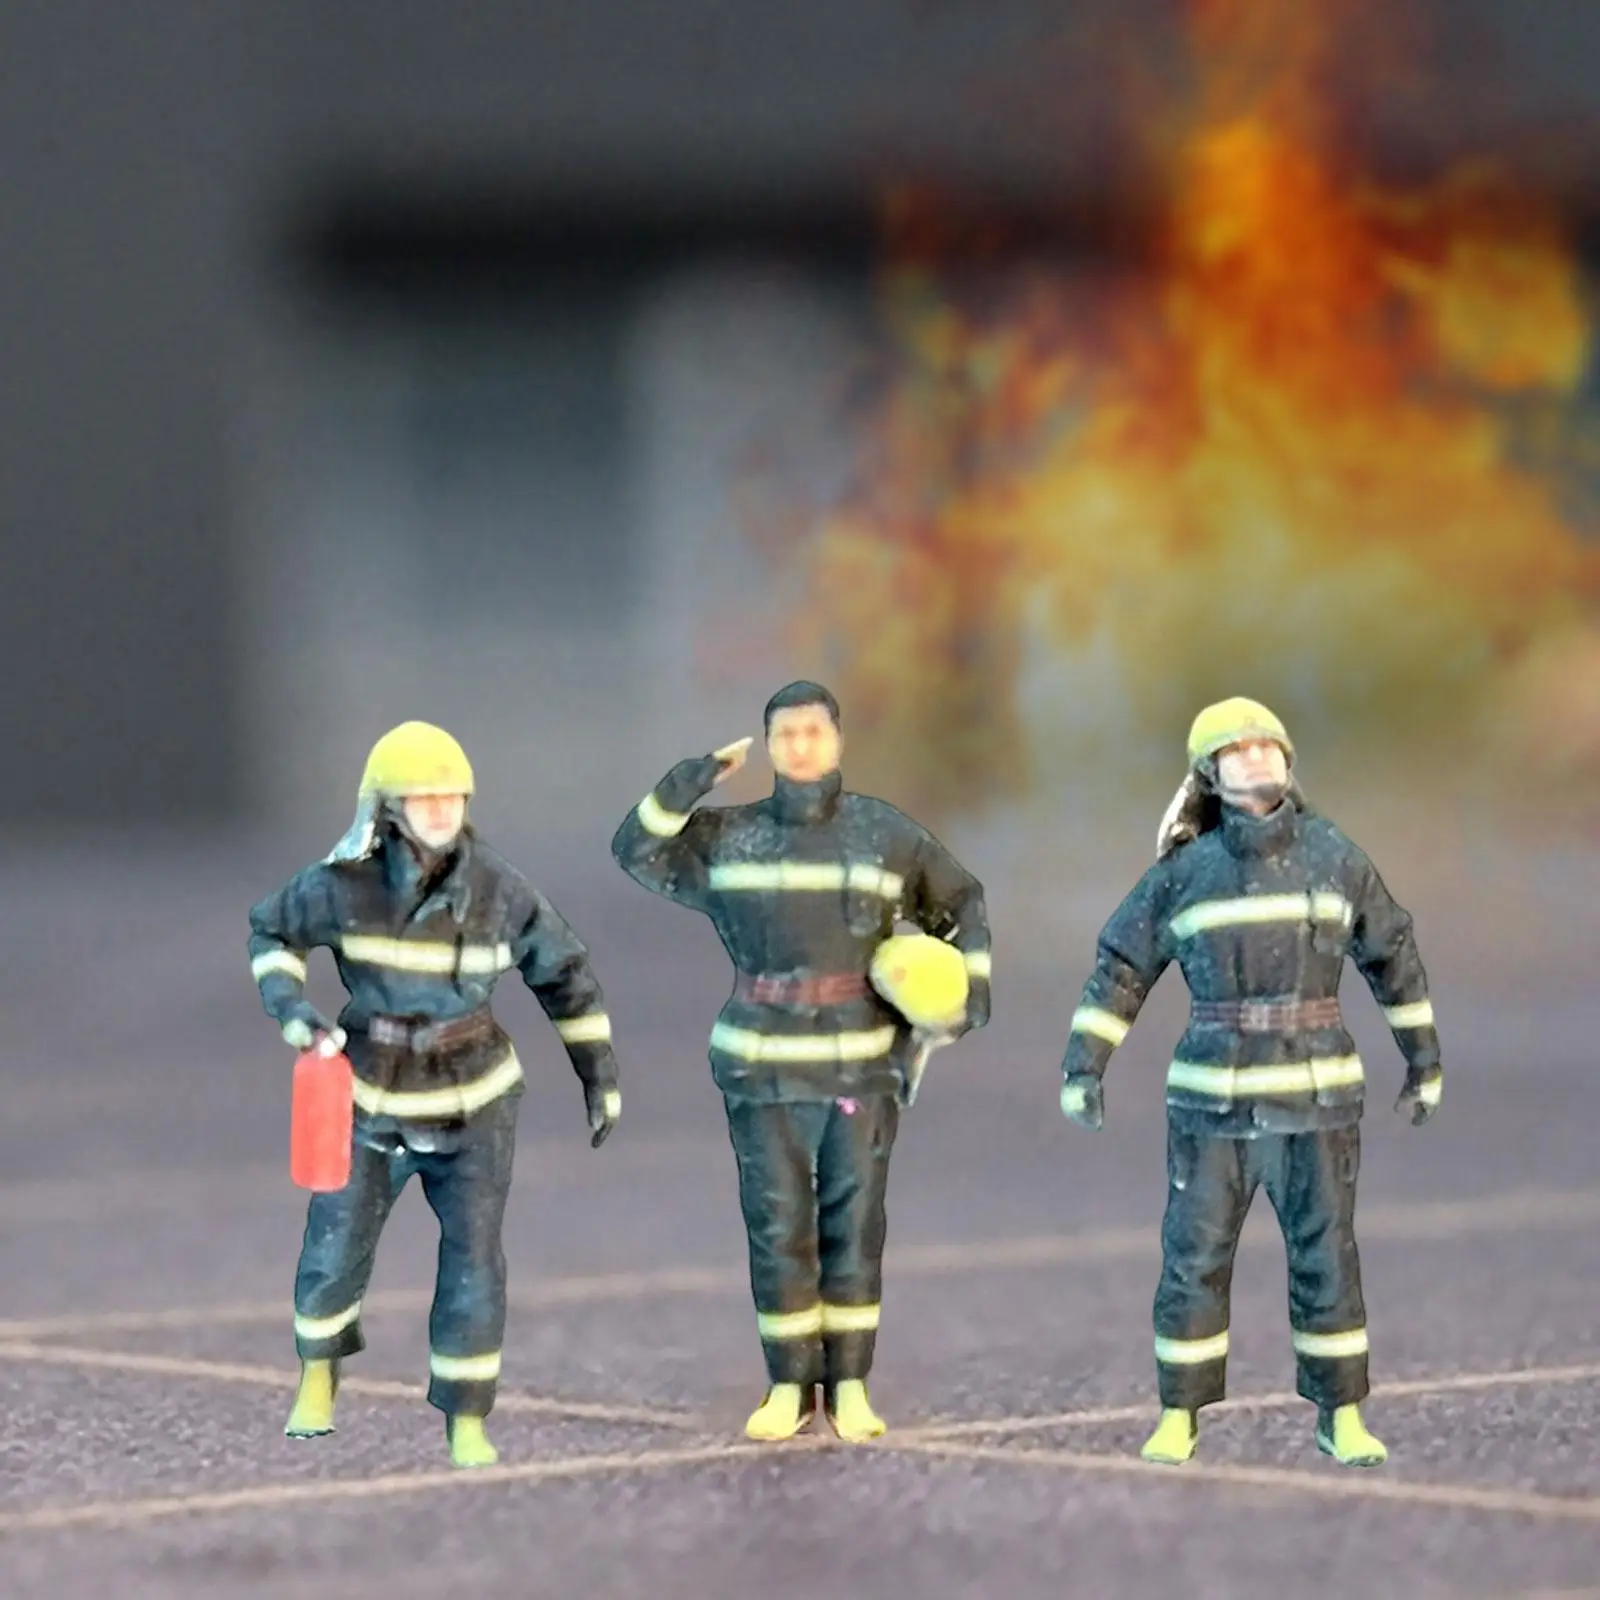 1/64 Scale Firefighter Model Collectibles Tiny People Model for Building Scenery Landscape Diorama Photography Props Layout